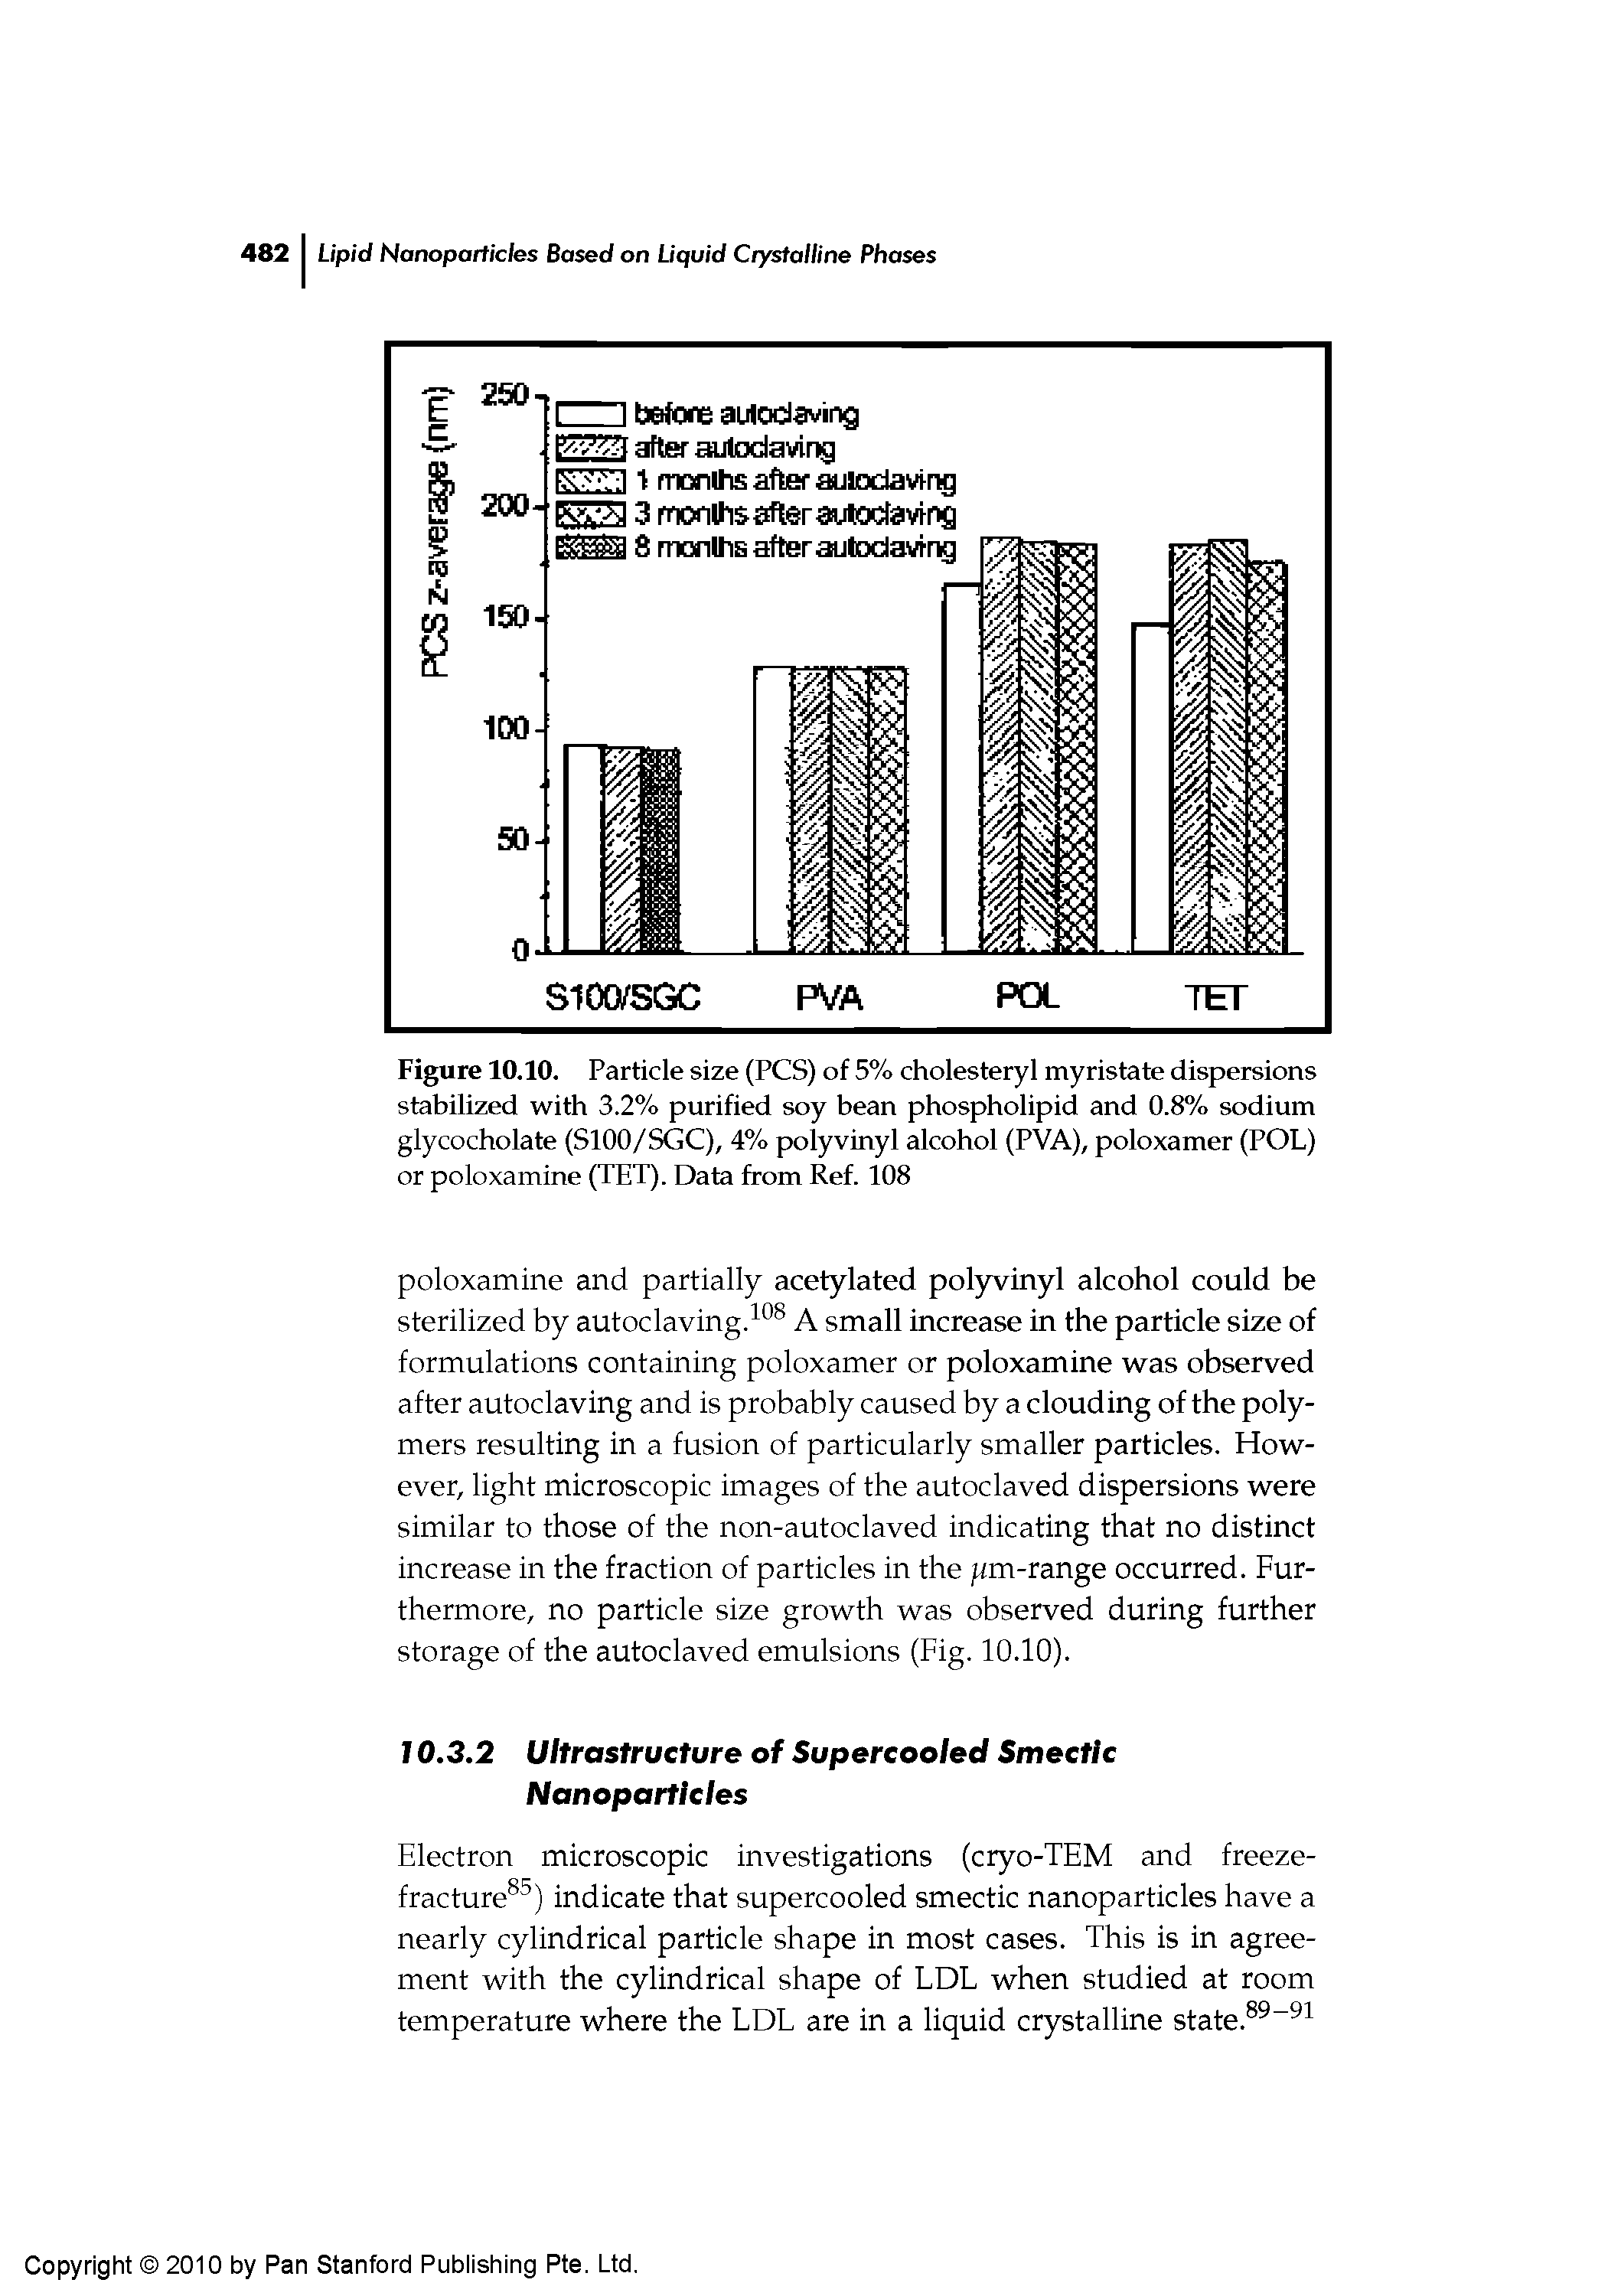 Figure 10.10. Particle size (PCS) of 5% cholesteryl myristate dispersions stabilized with 3.2% purified soy bean phospholipid and 0.8% sodium glycocholate (SIOO/SGC), 4% pxjlyvinyl alcohol (PVA), poloxamer (POL) or poloxamine (TET). Data from Ref. 108...